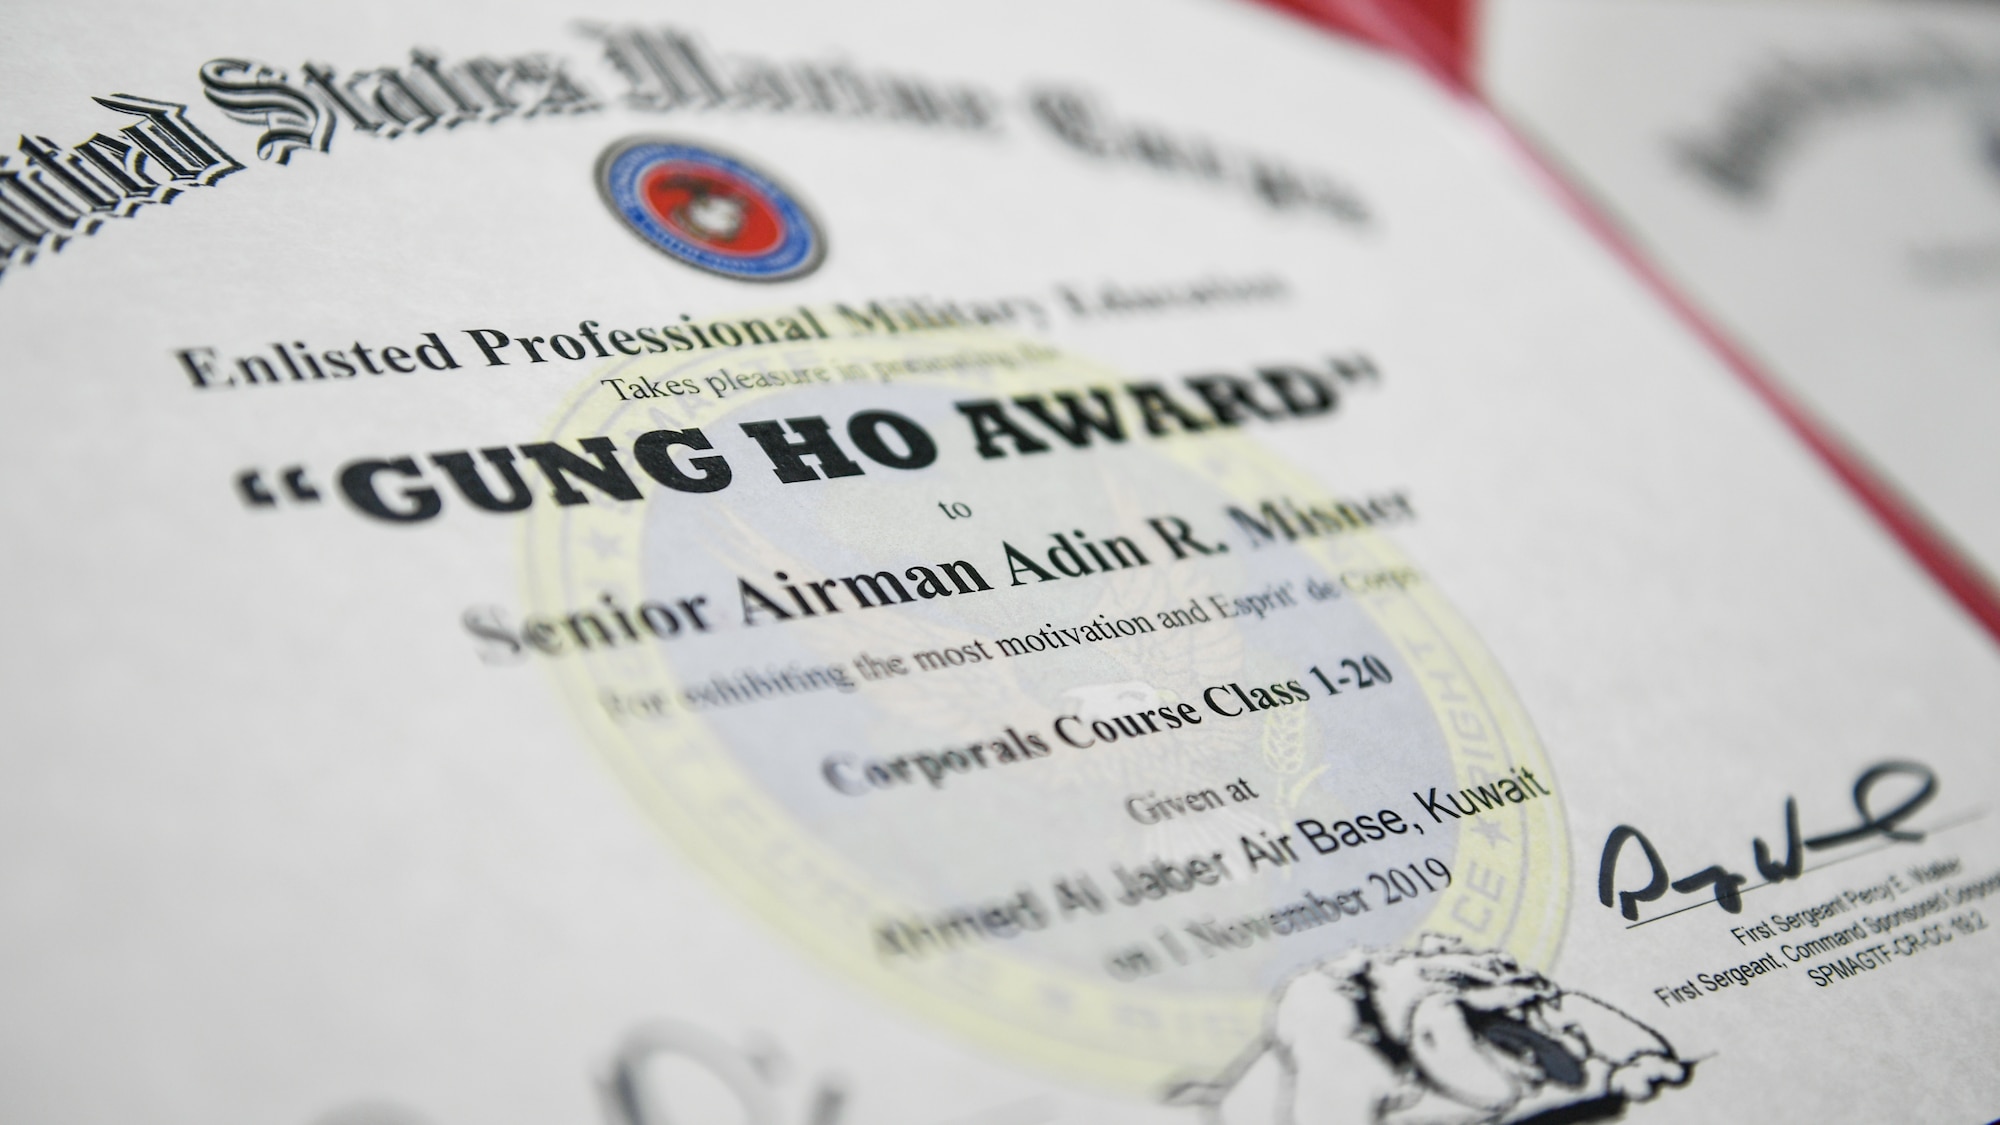 The Gung-Ho award is a peer-based honor given to the student that exhibits the most motivation and espirit de corps during the course of the class. That honor was given to Senior Airman Adin Misner, 386th Expeditionary Communications Squadron client system technician, for his growth as a motivator and leader amongst his peers